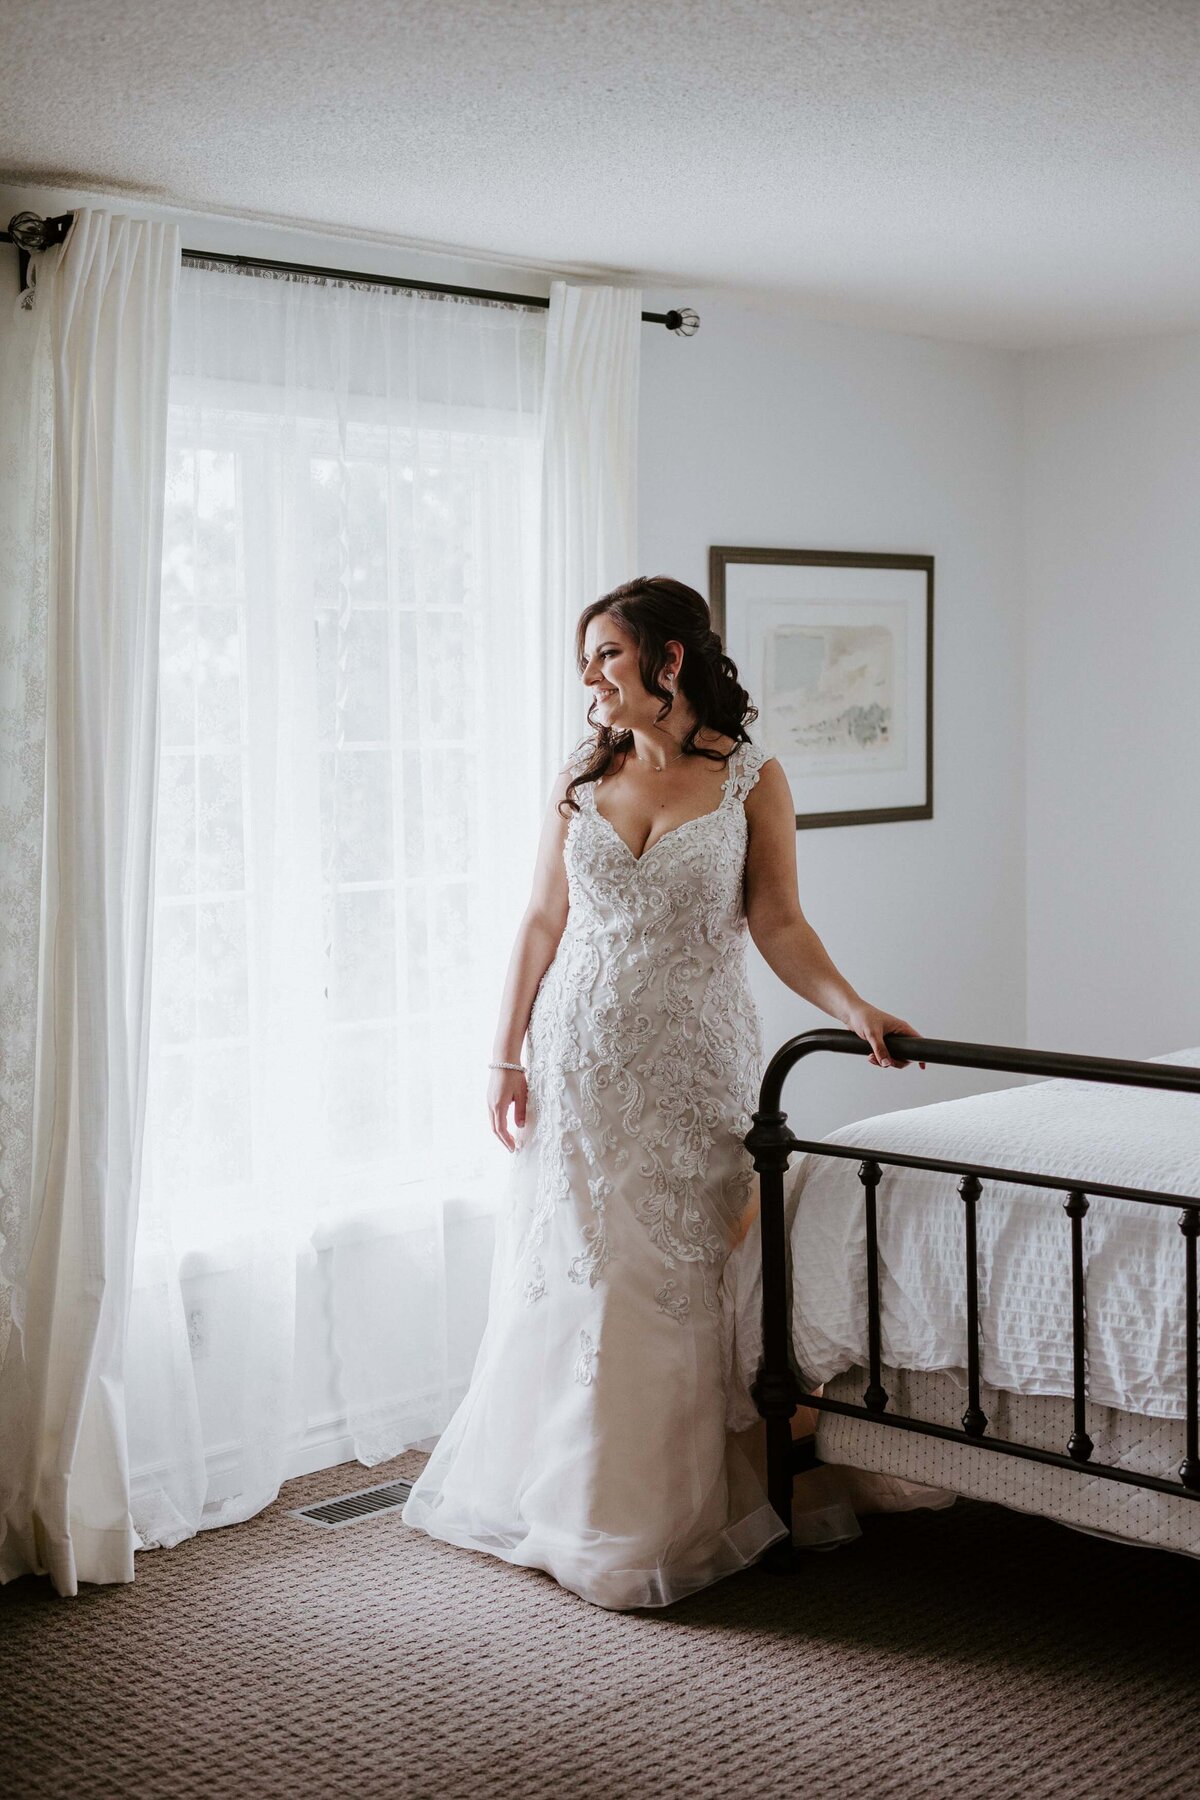 Bride is posing for a photo in the bridal suite before her wedding. She has one hand gently resting on the foot of the bed while looking out the window.